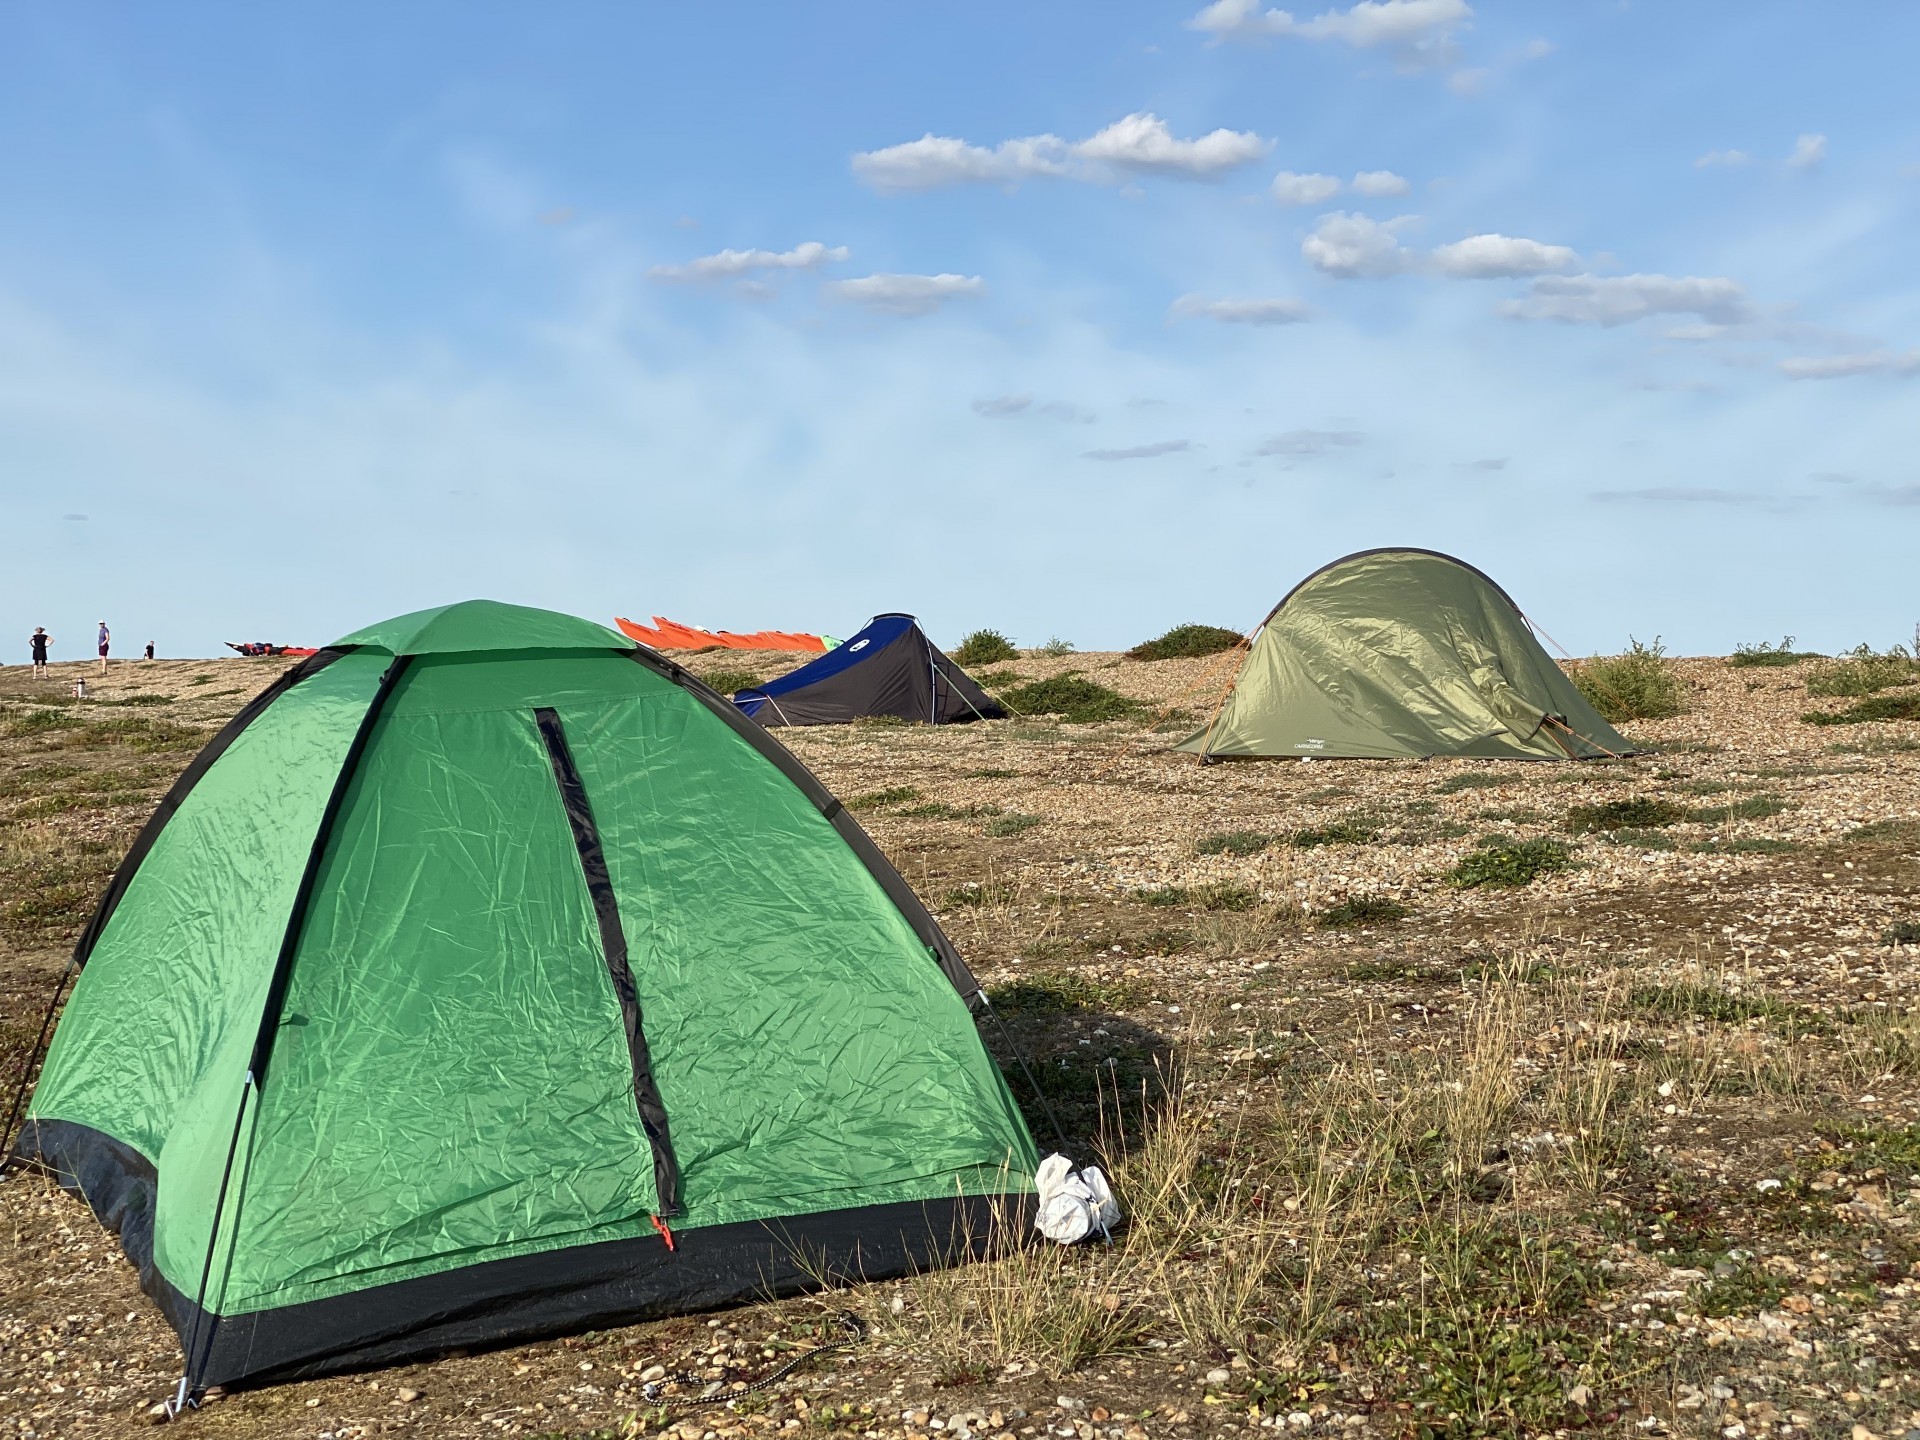 Green tents on a beach provided for the 'all inclusive' wild camping trips.